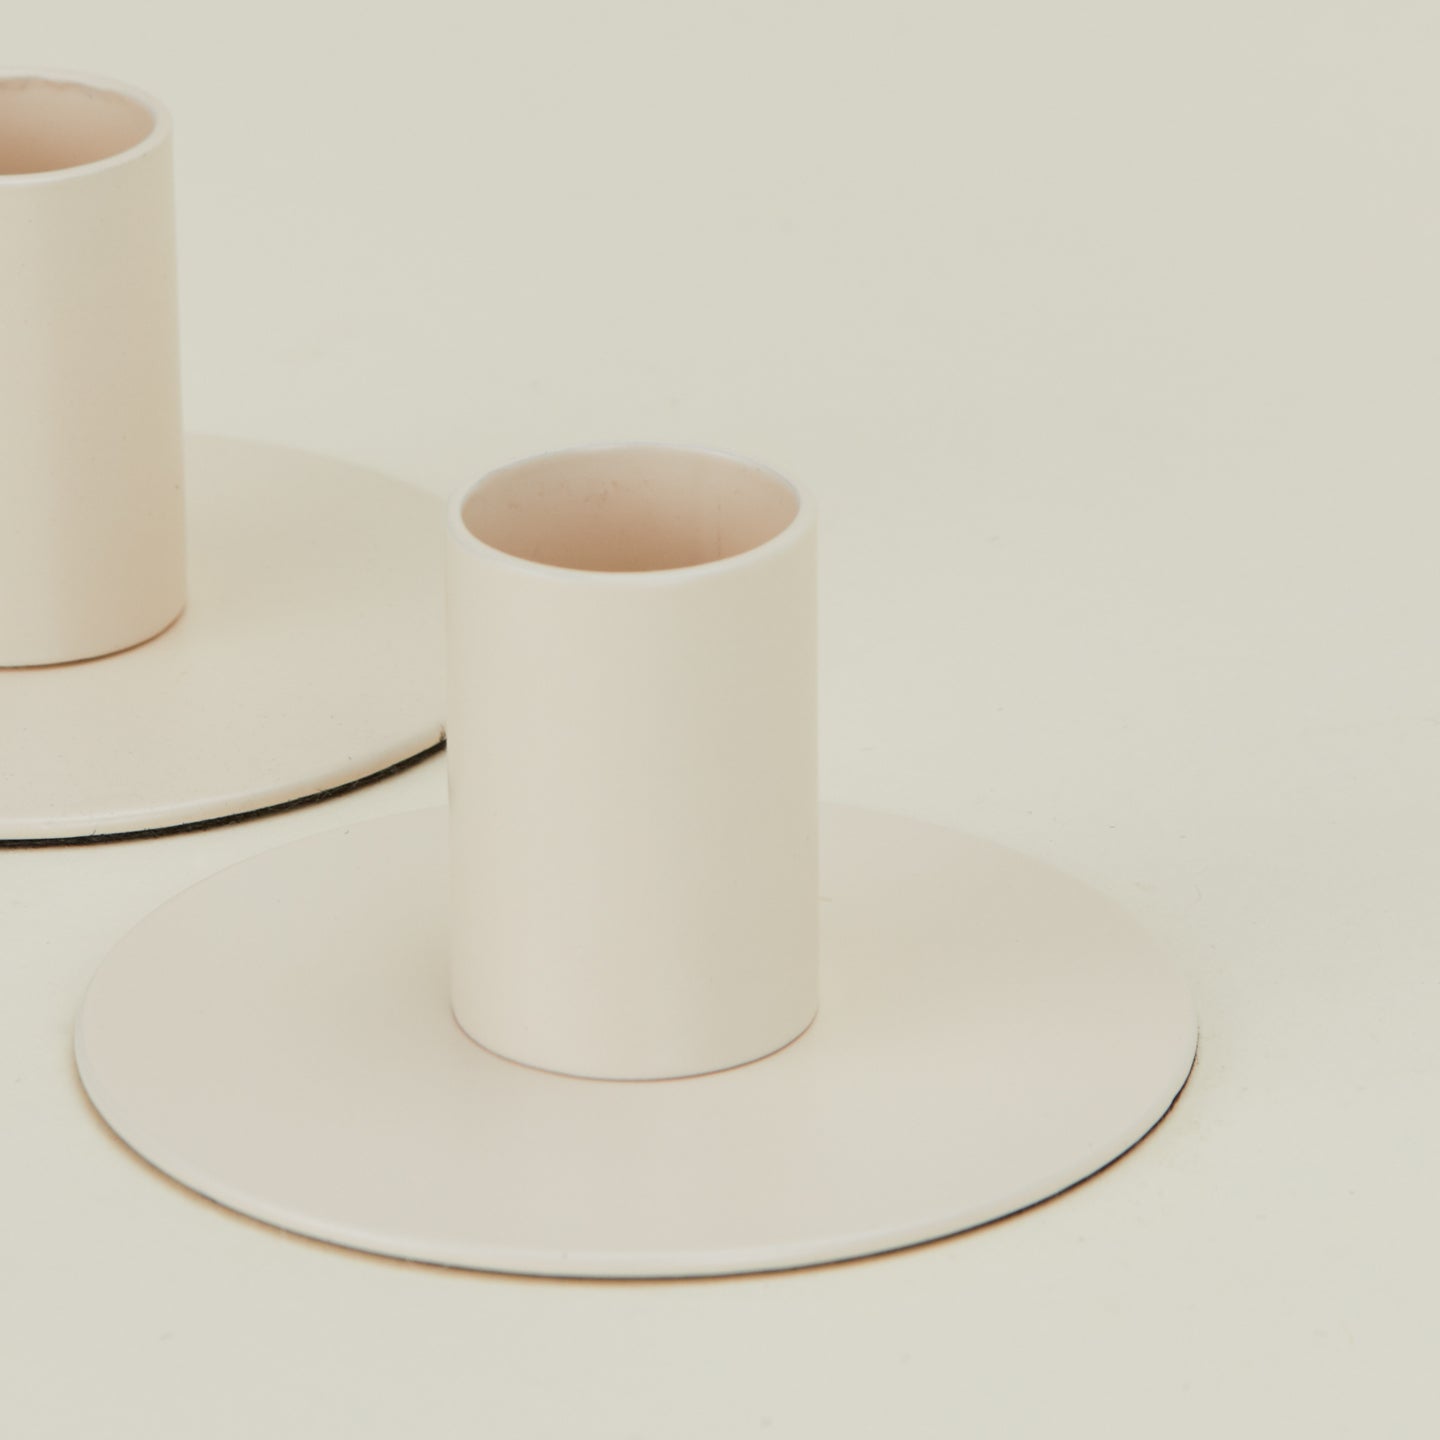 Essential Metal Candle Holders, Set of 2 - Ivory